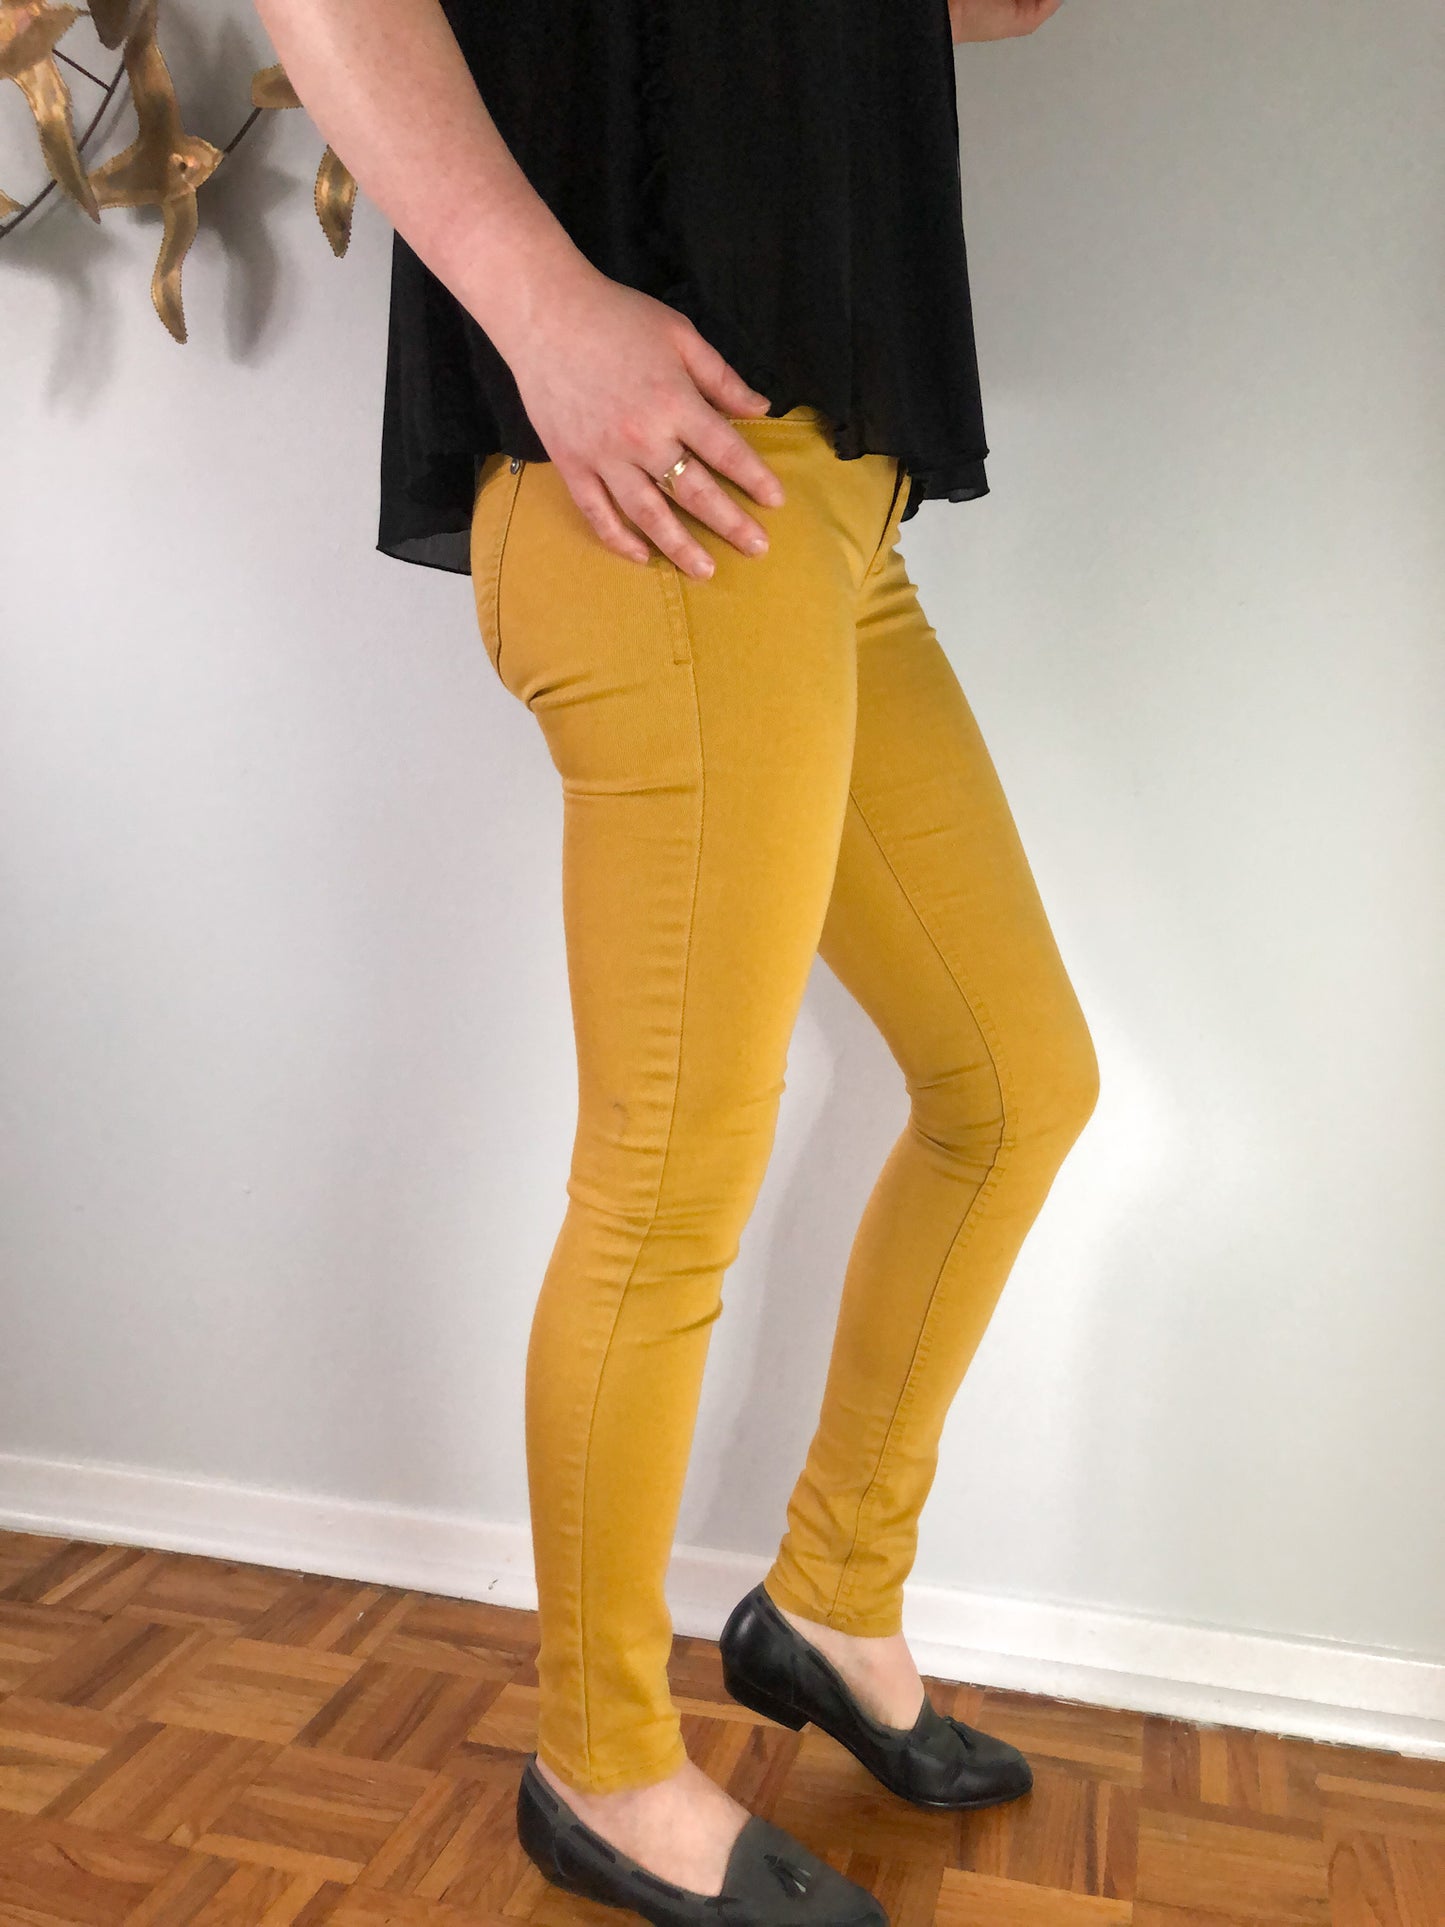 Material Girl Mustard Yellow Skinny Jeggings - Size 1 (XS/S)